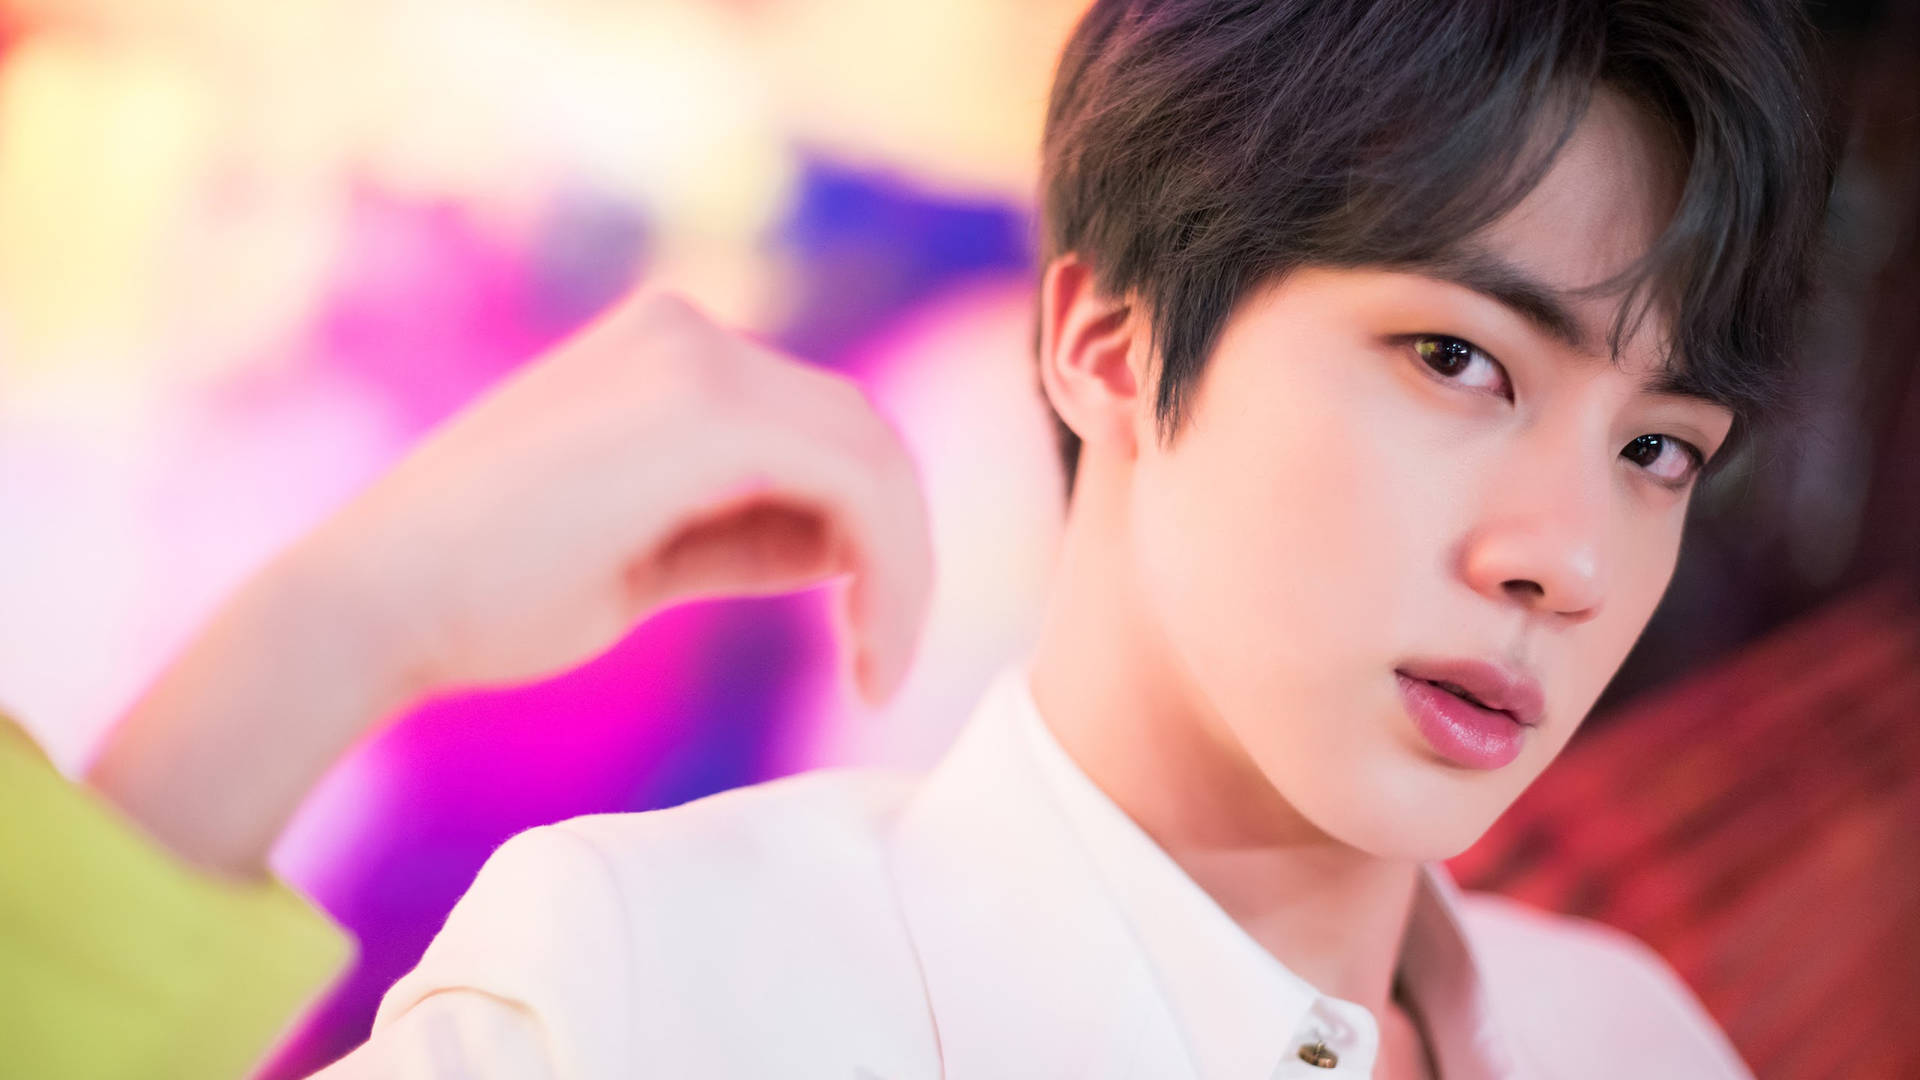 Top 999+ Bts Jin Wallpapers Full HD, 4K✅Free to Use